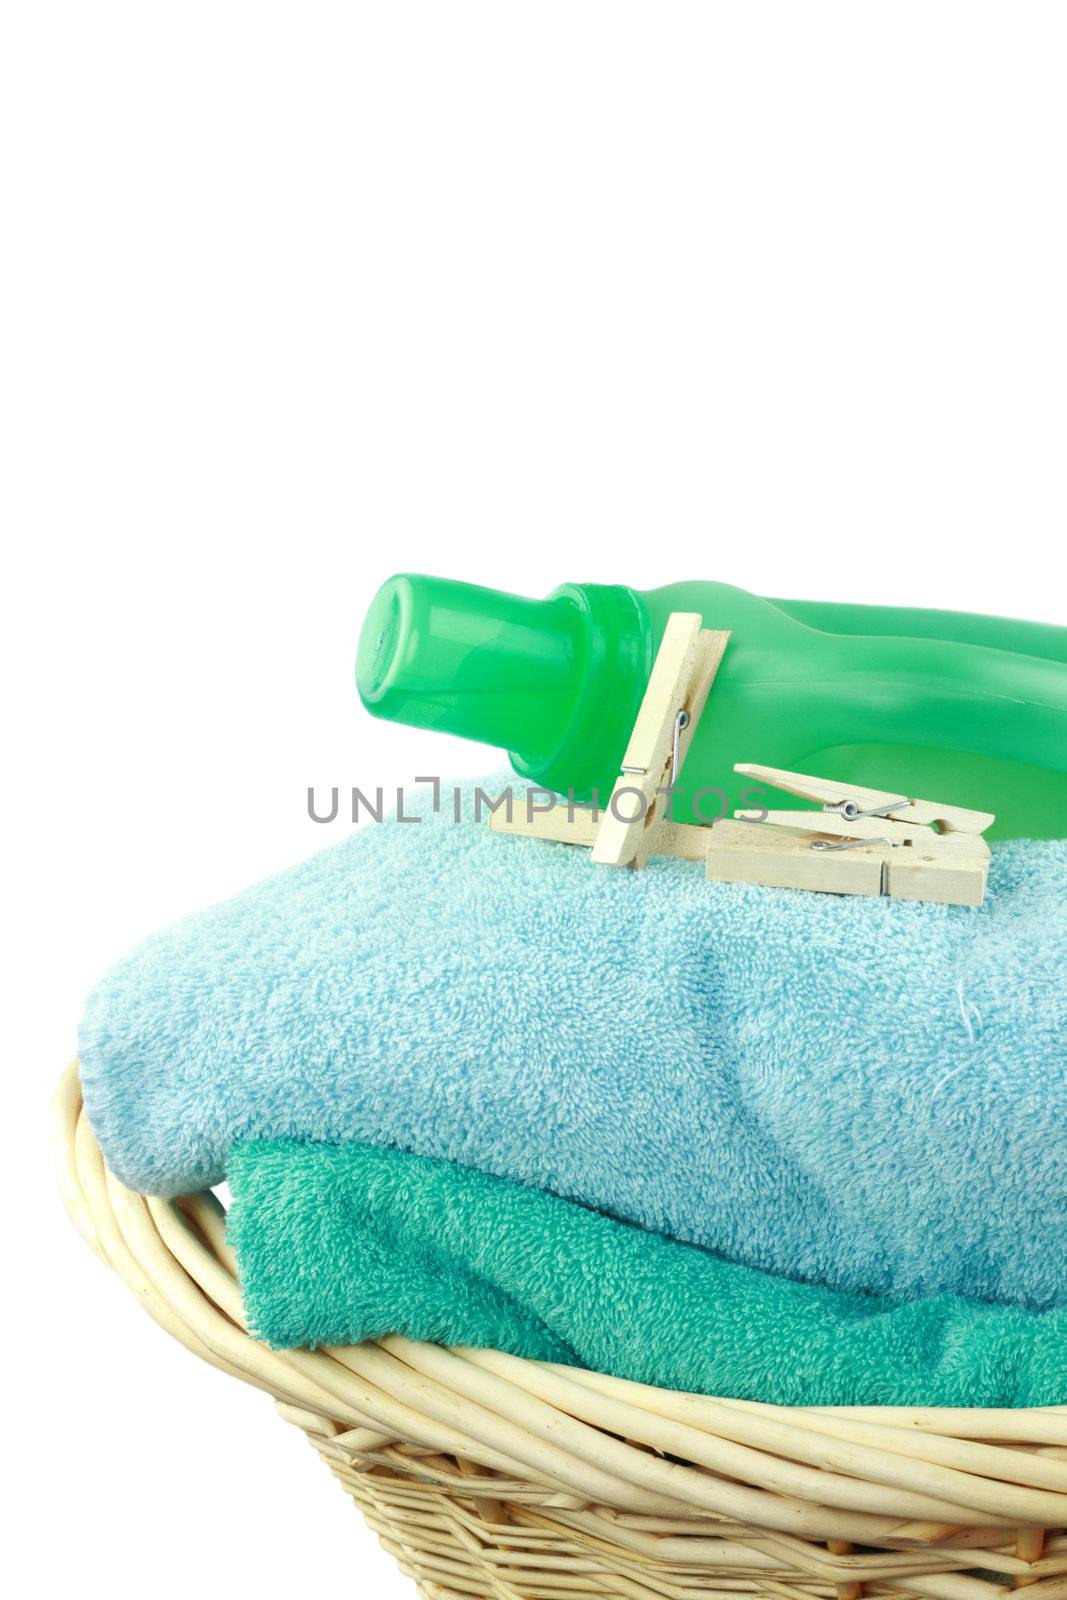 Laundry basket with fresh towels, laundry soap and clothespins isolated on white.

